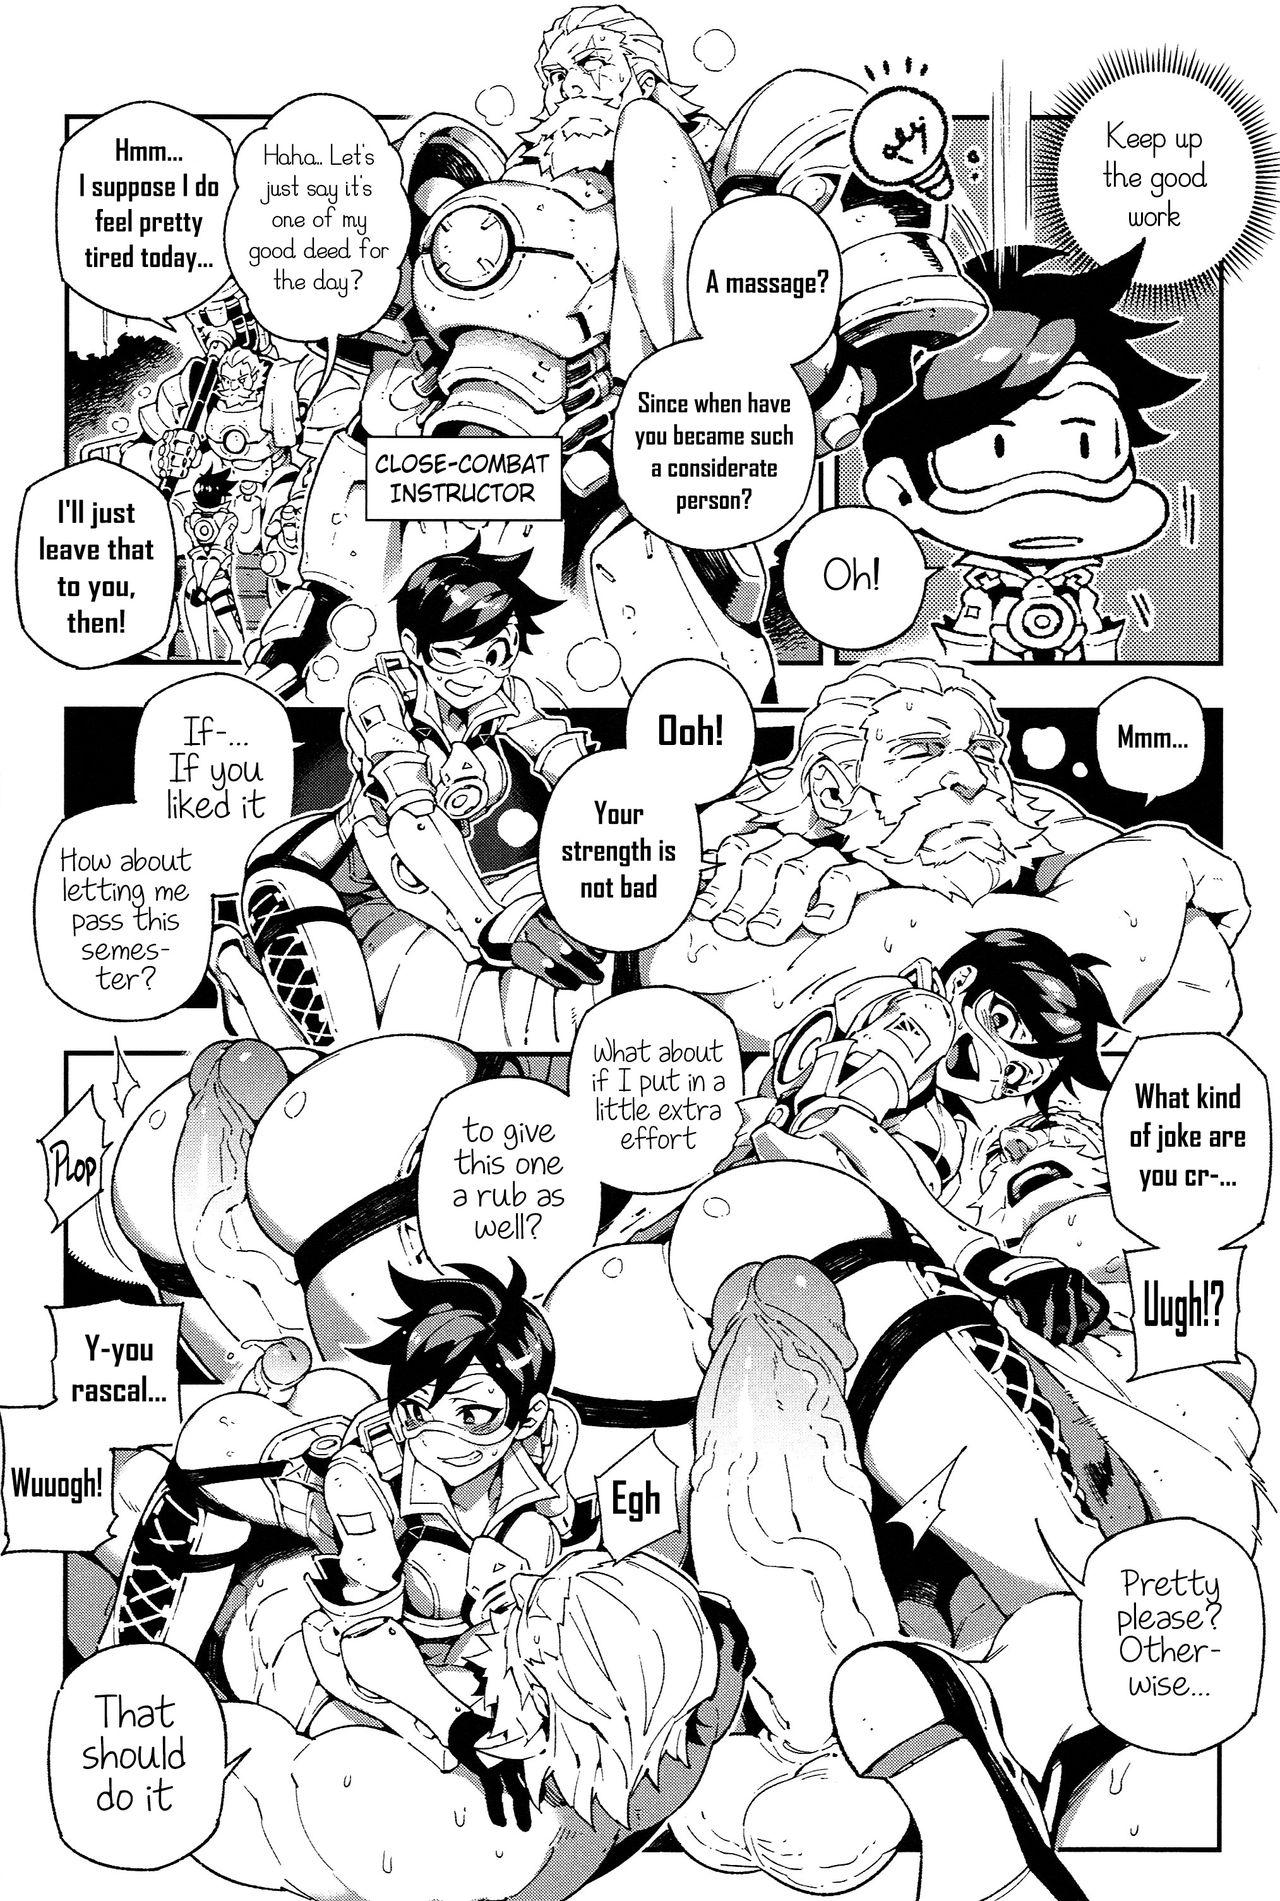 Female Orgasm OVERTIME!! OVERWATCH FANBOOK VOL.1 - Overwatch 1080p - Page 7